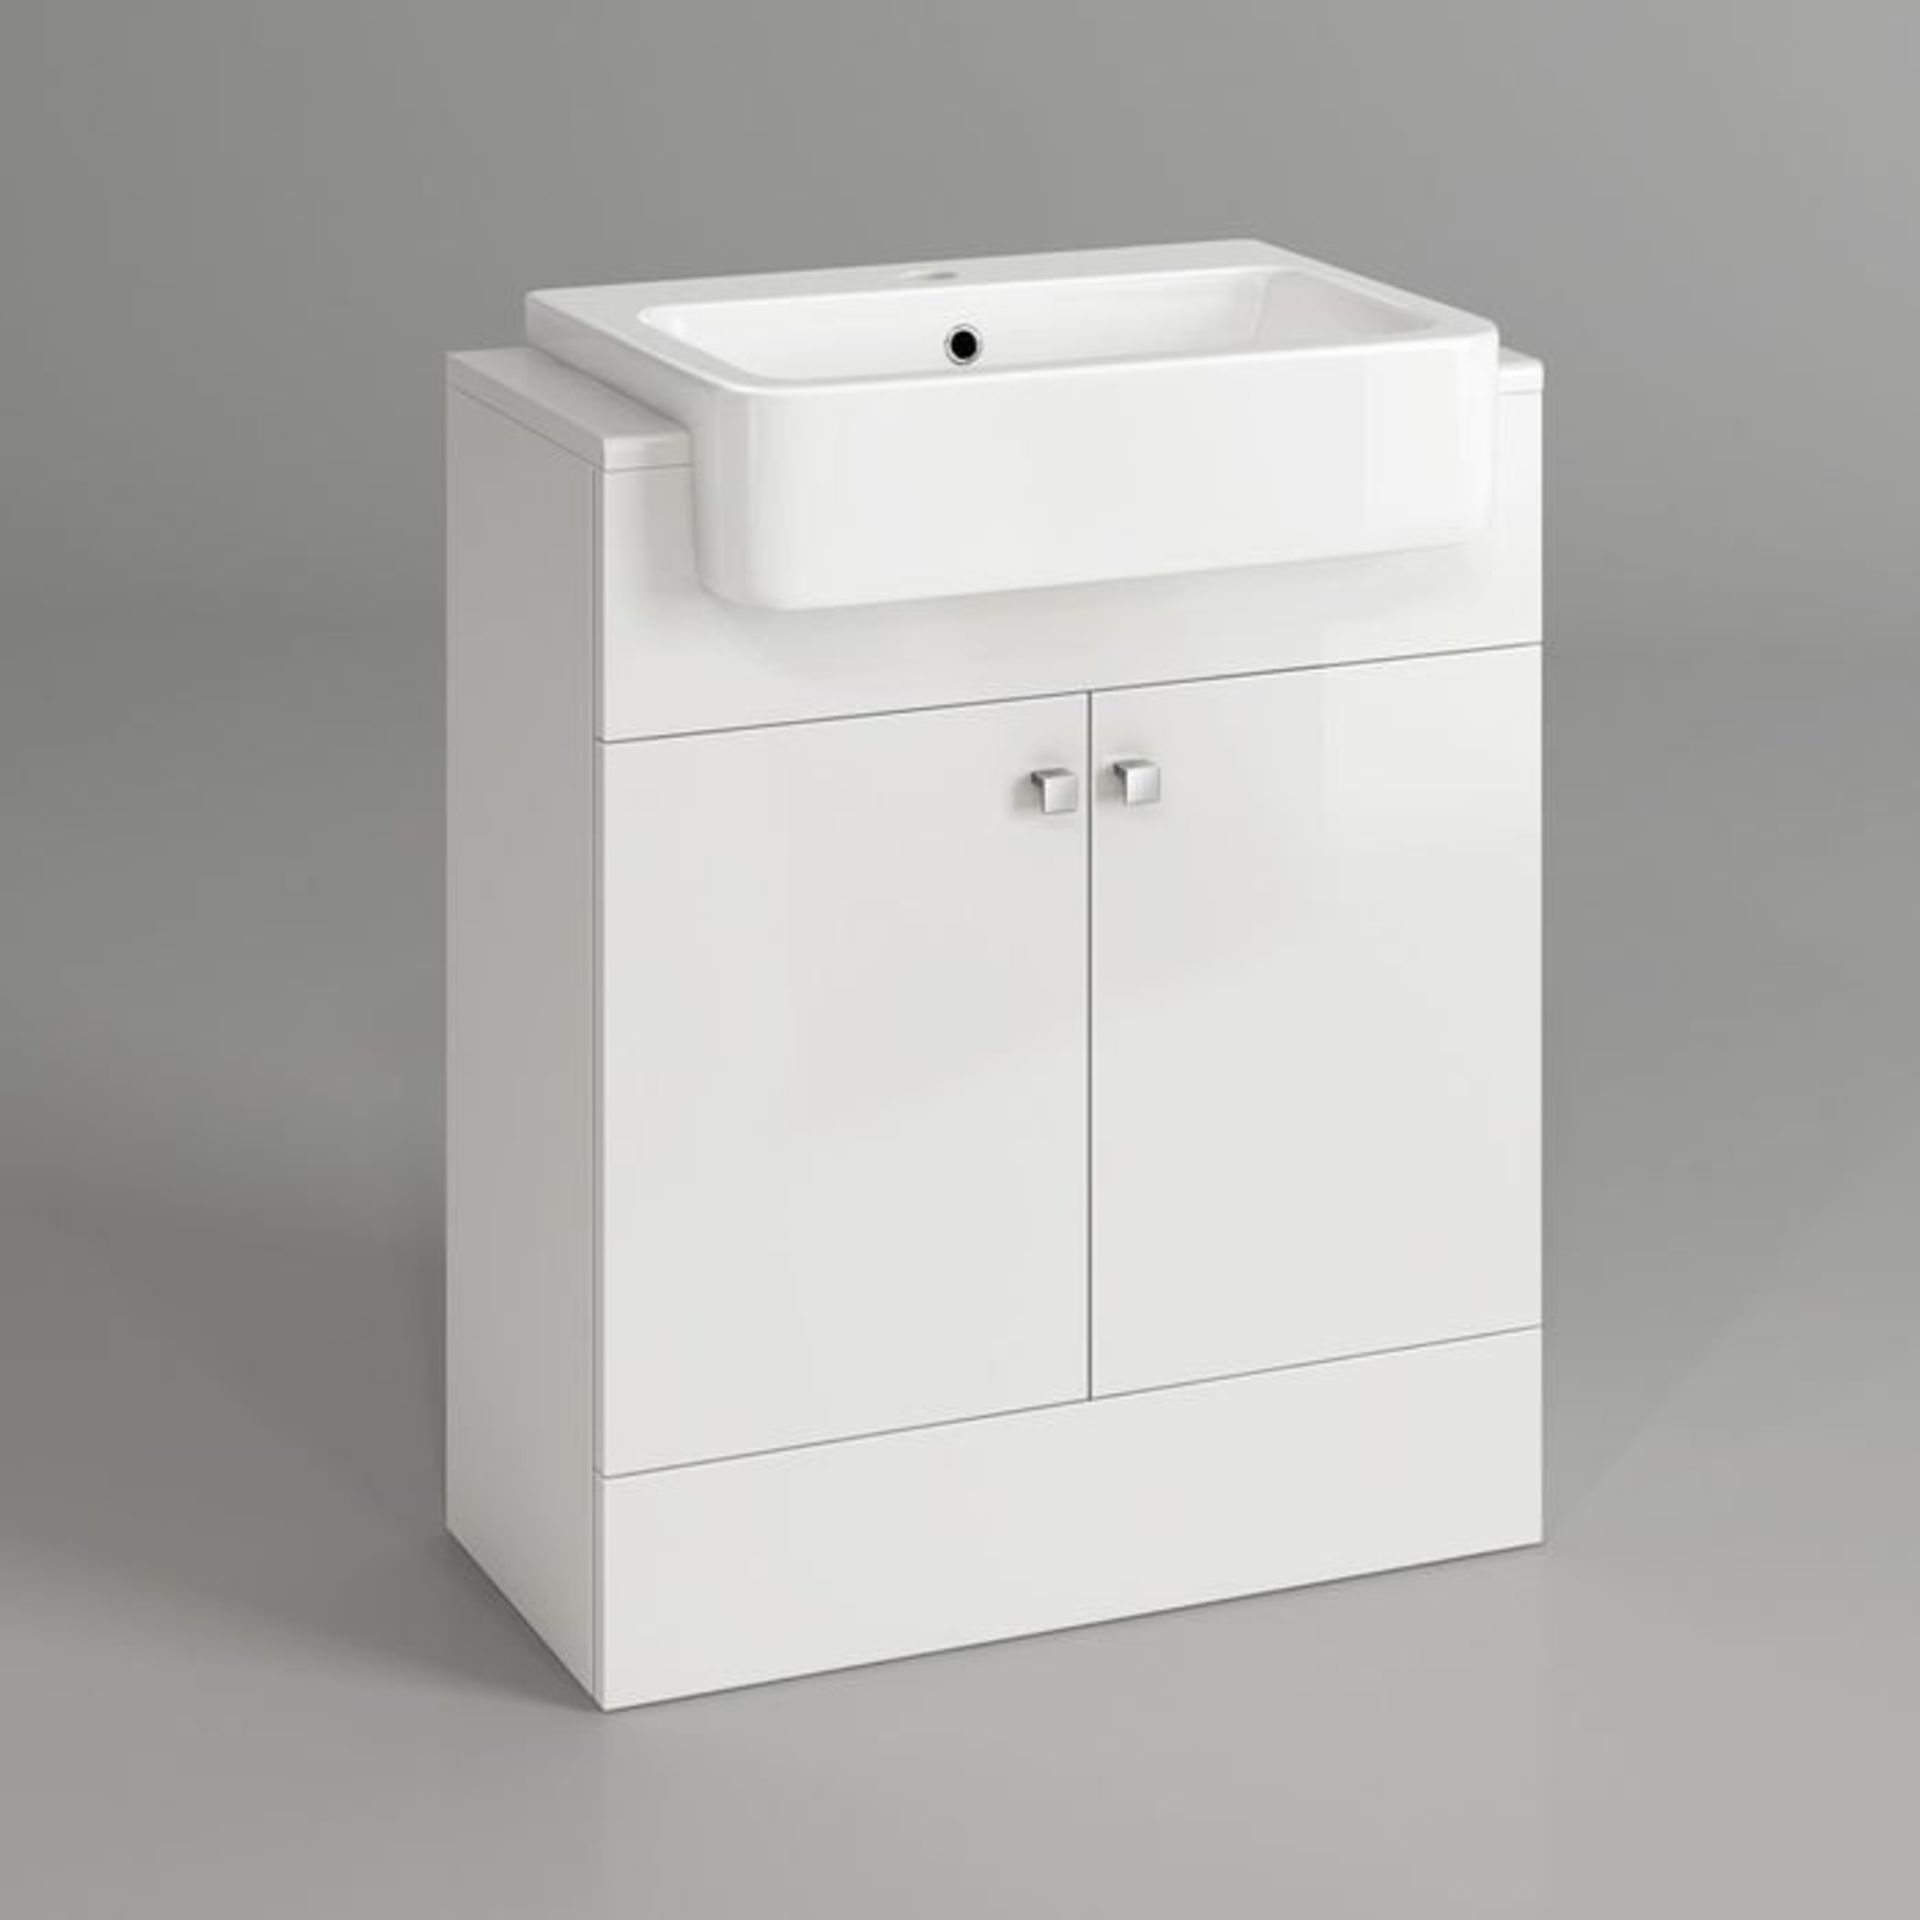 (H20) 660mm Harper Gloss White Basin Vanity Unit - Floor Standing RRP £449.99. COMES COMPLETE WITH - Image 4 of 5